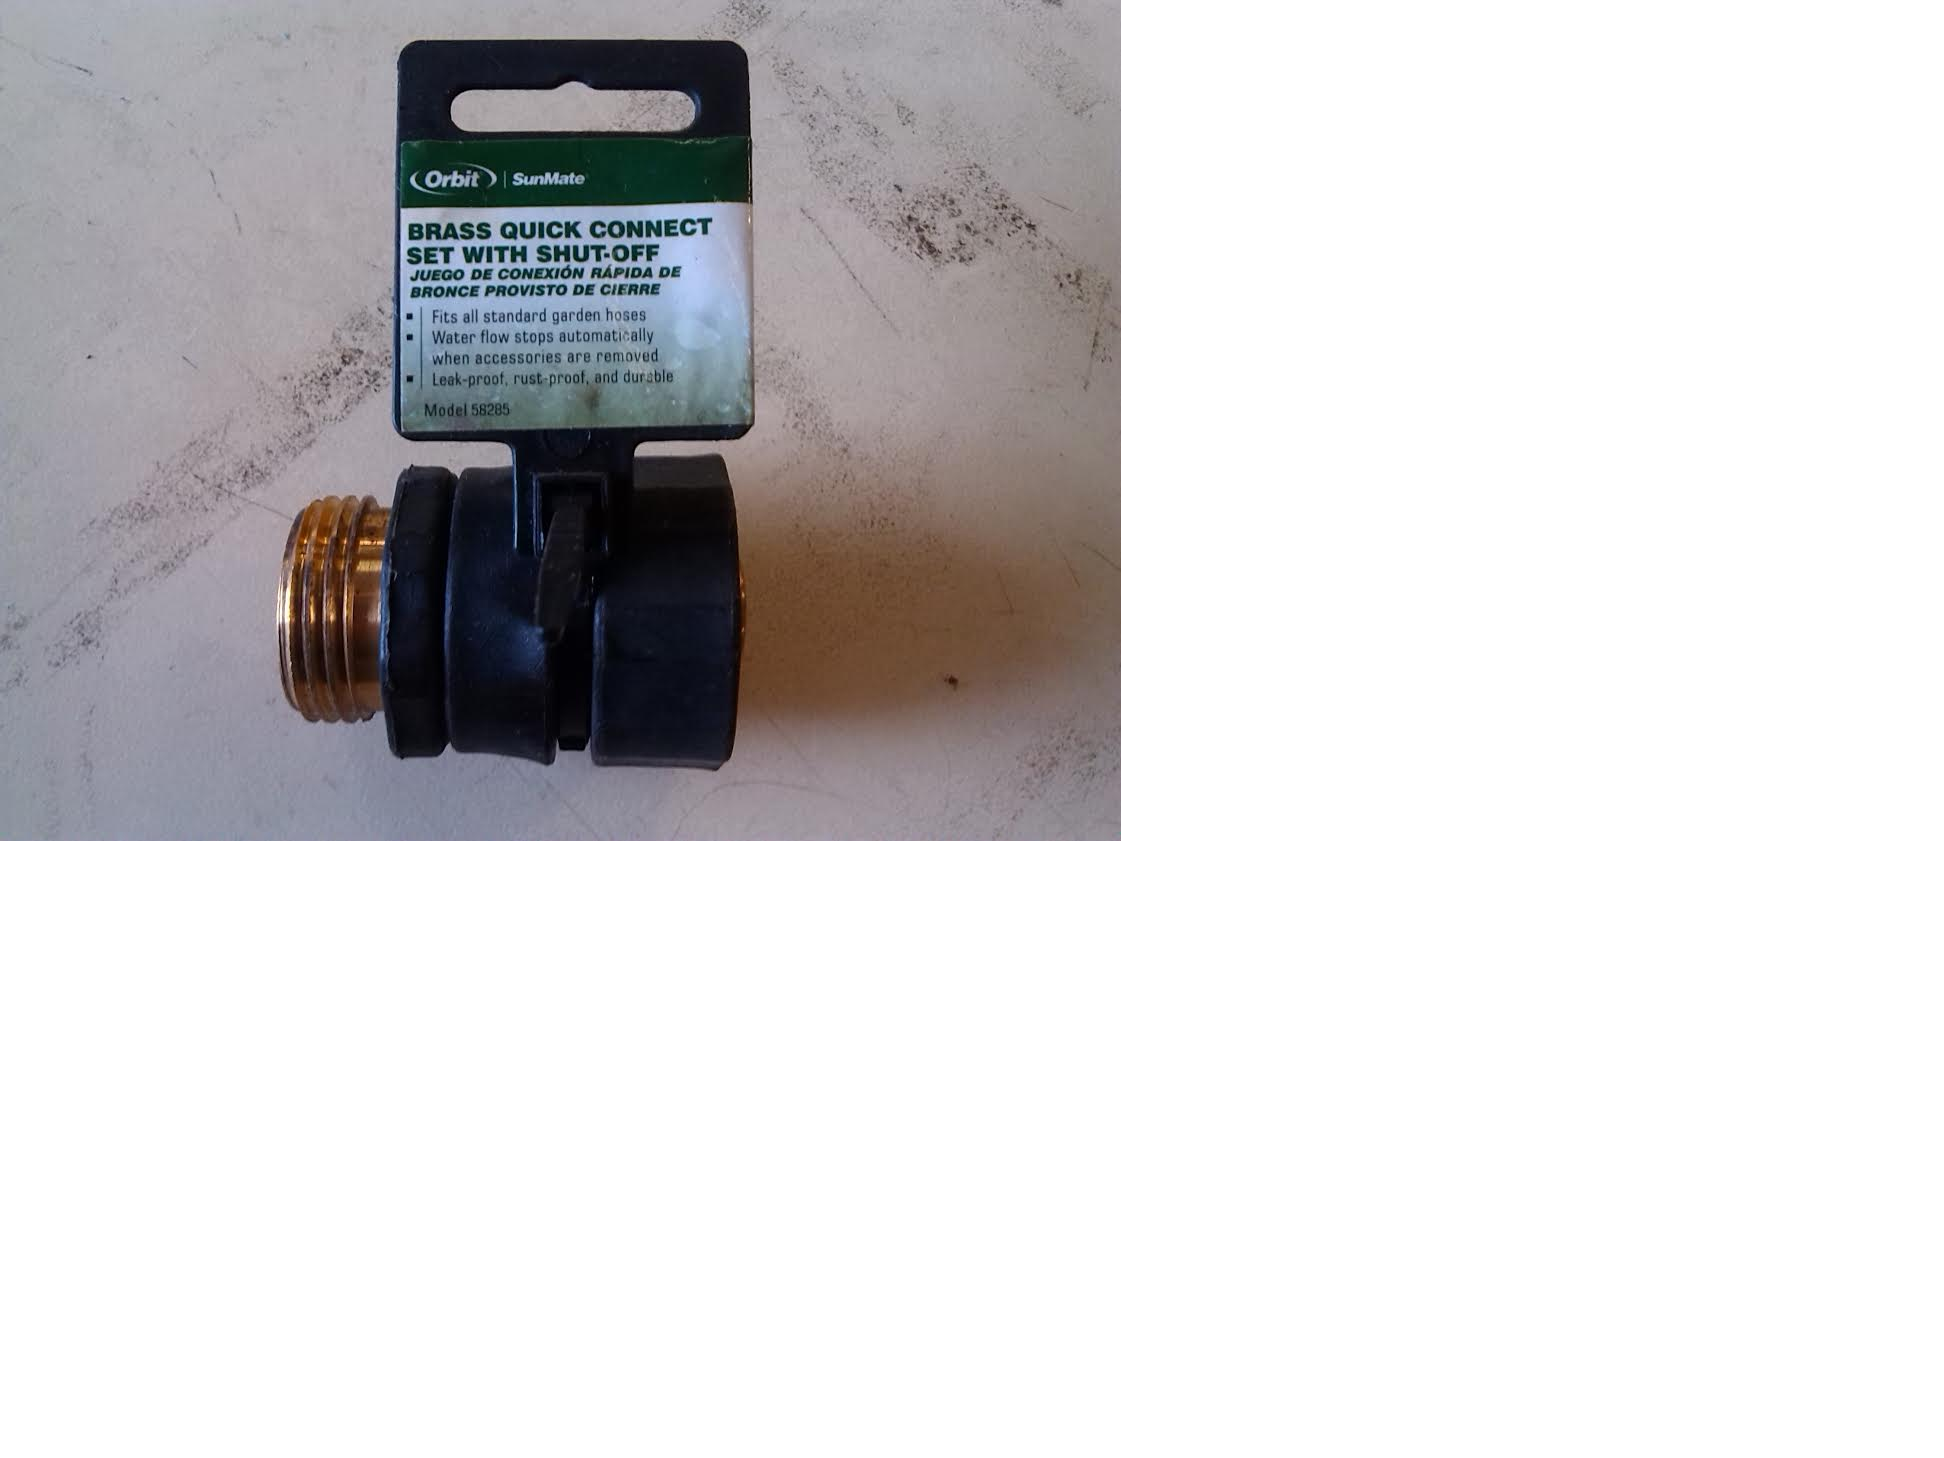 Hose connector Garden Hoses & Accessories at